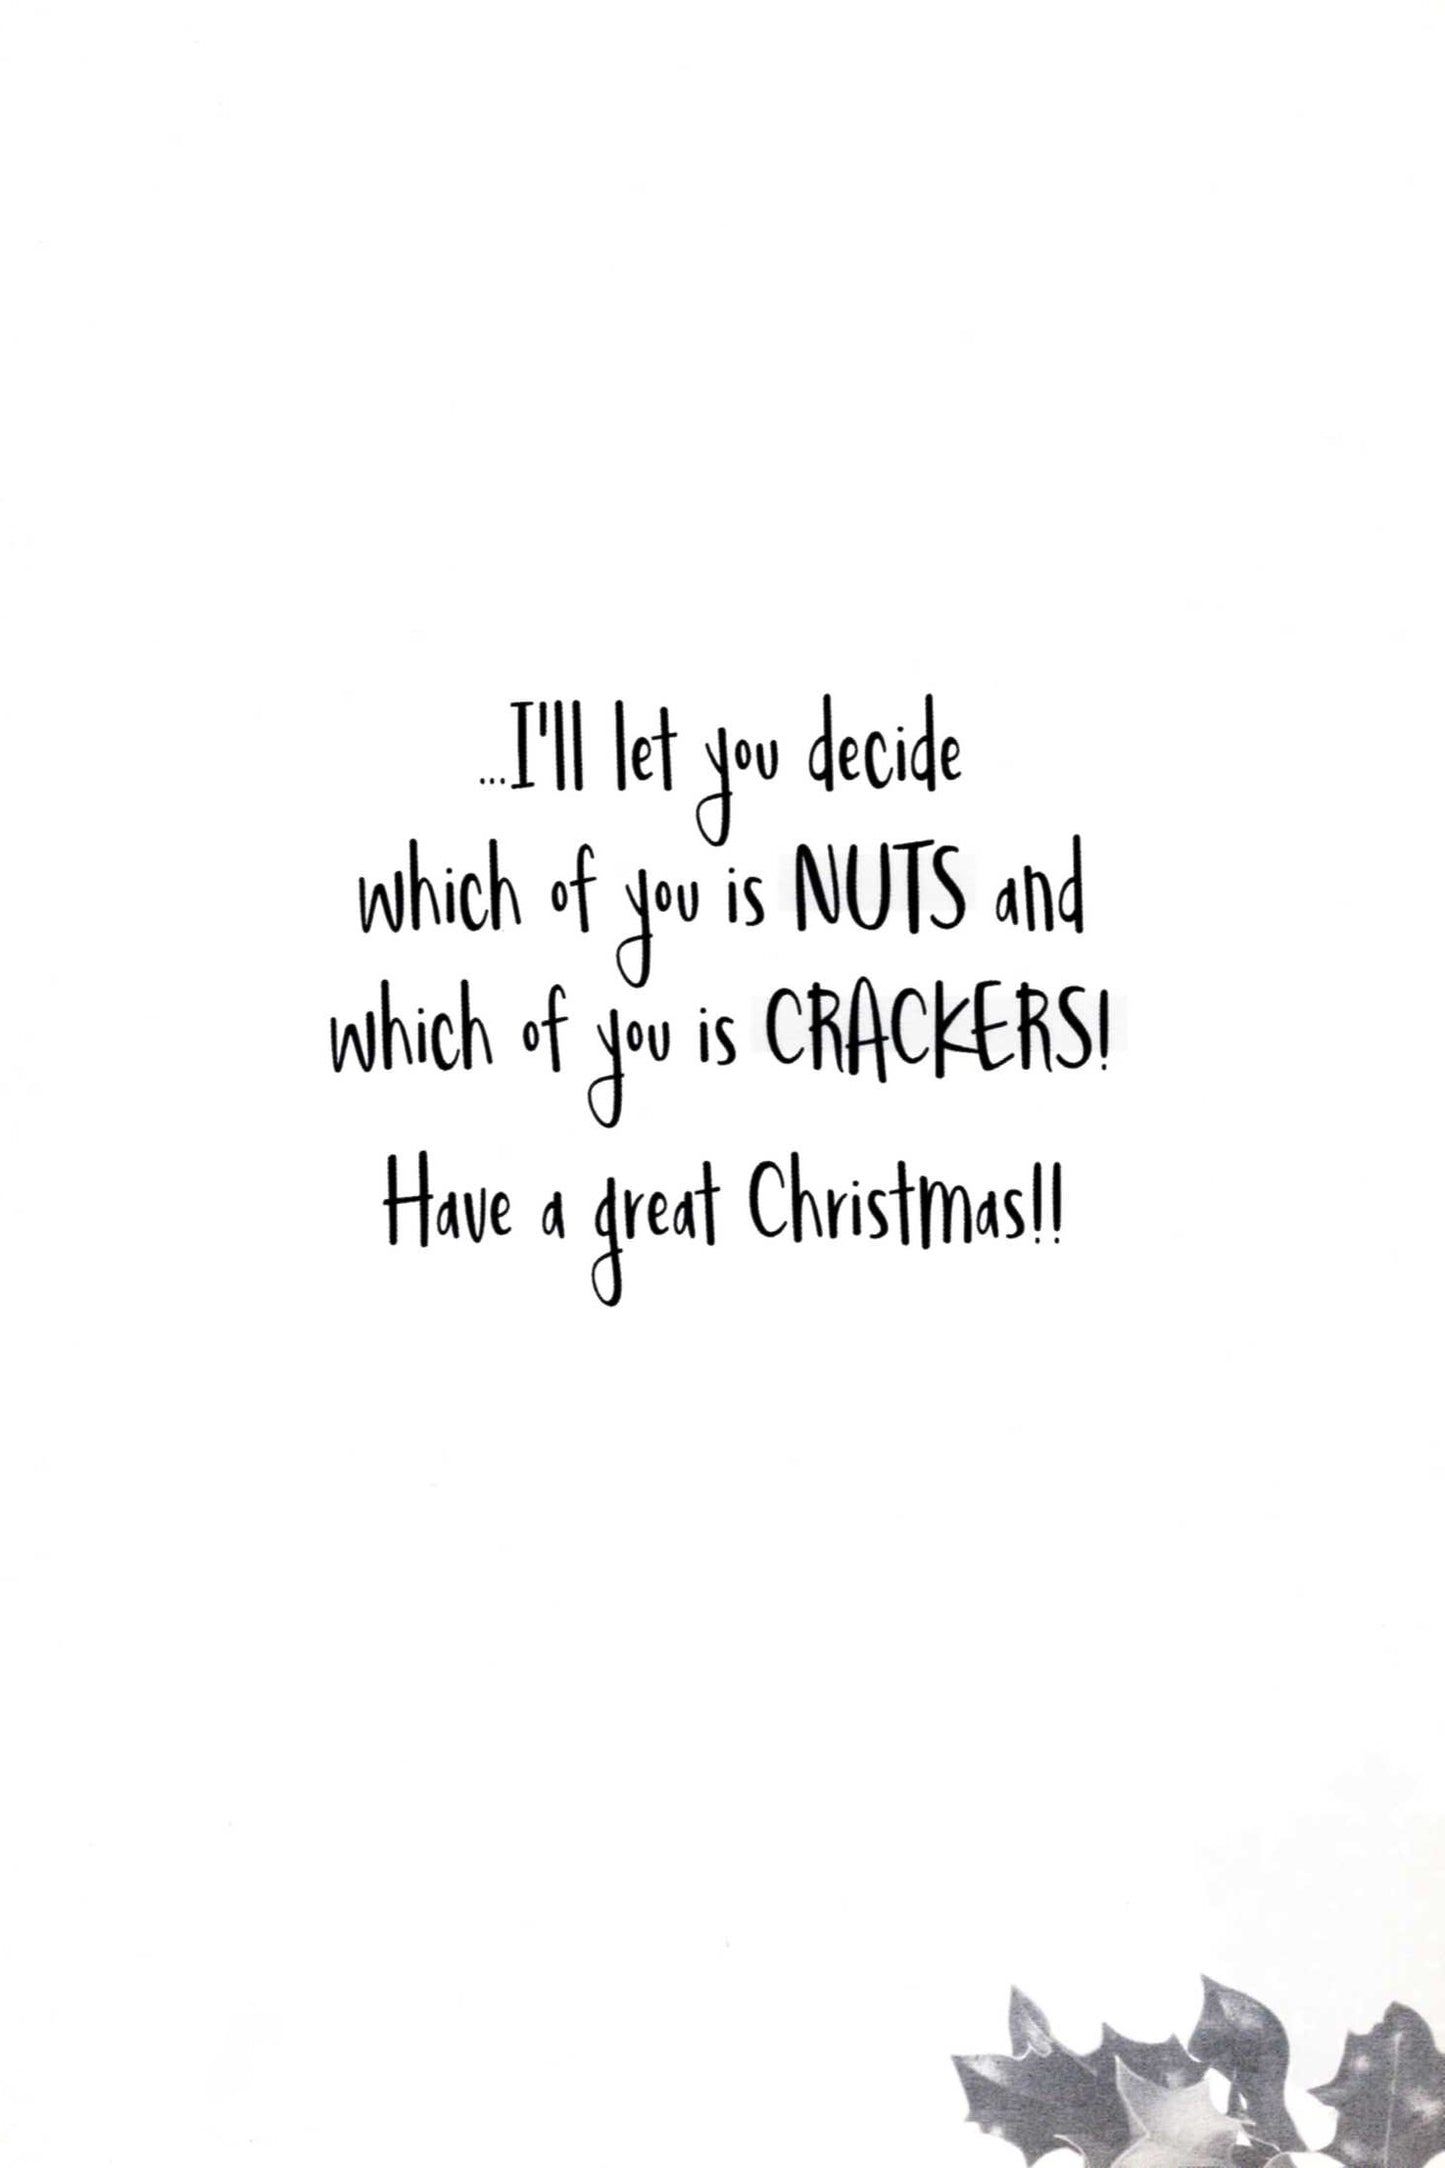 Both Of You Nuts & Crackers... Funny Christmas Card